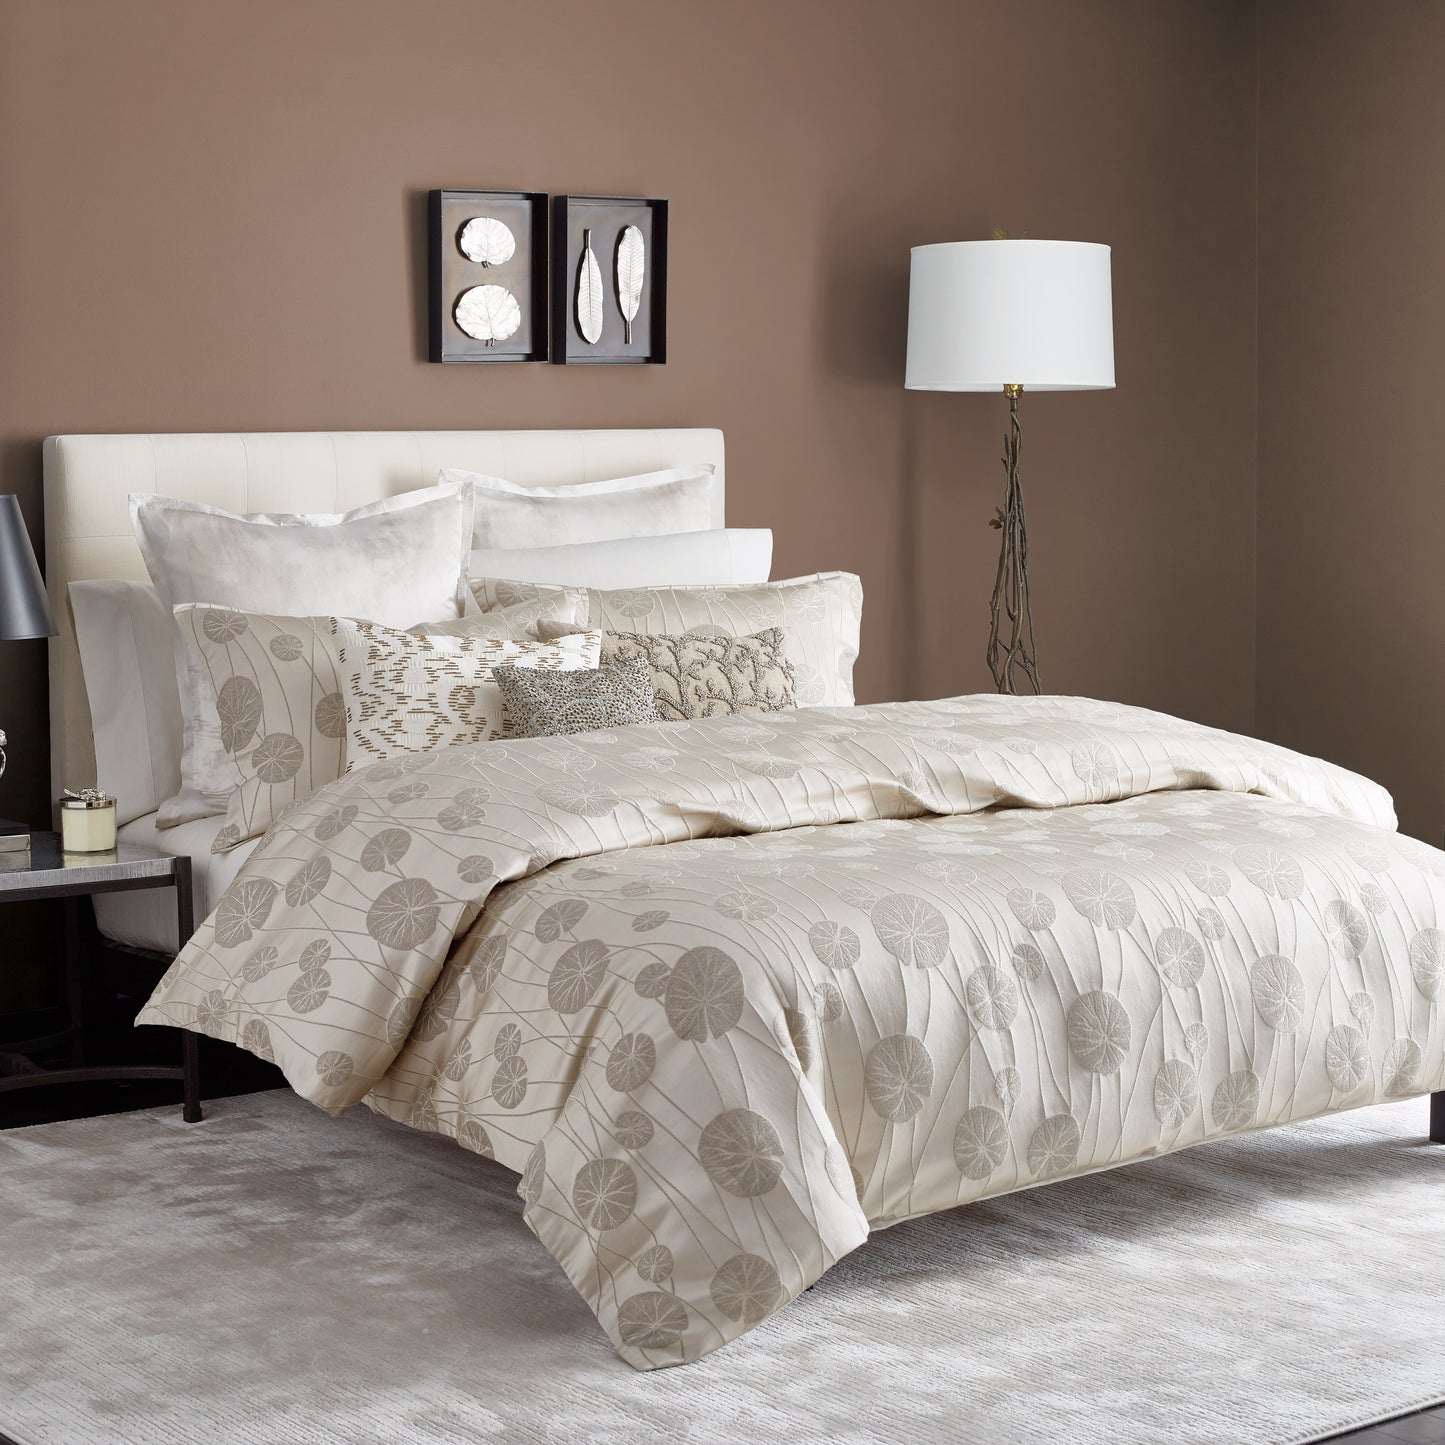 Michael Aram Lily Pad Bedding Collection